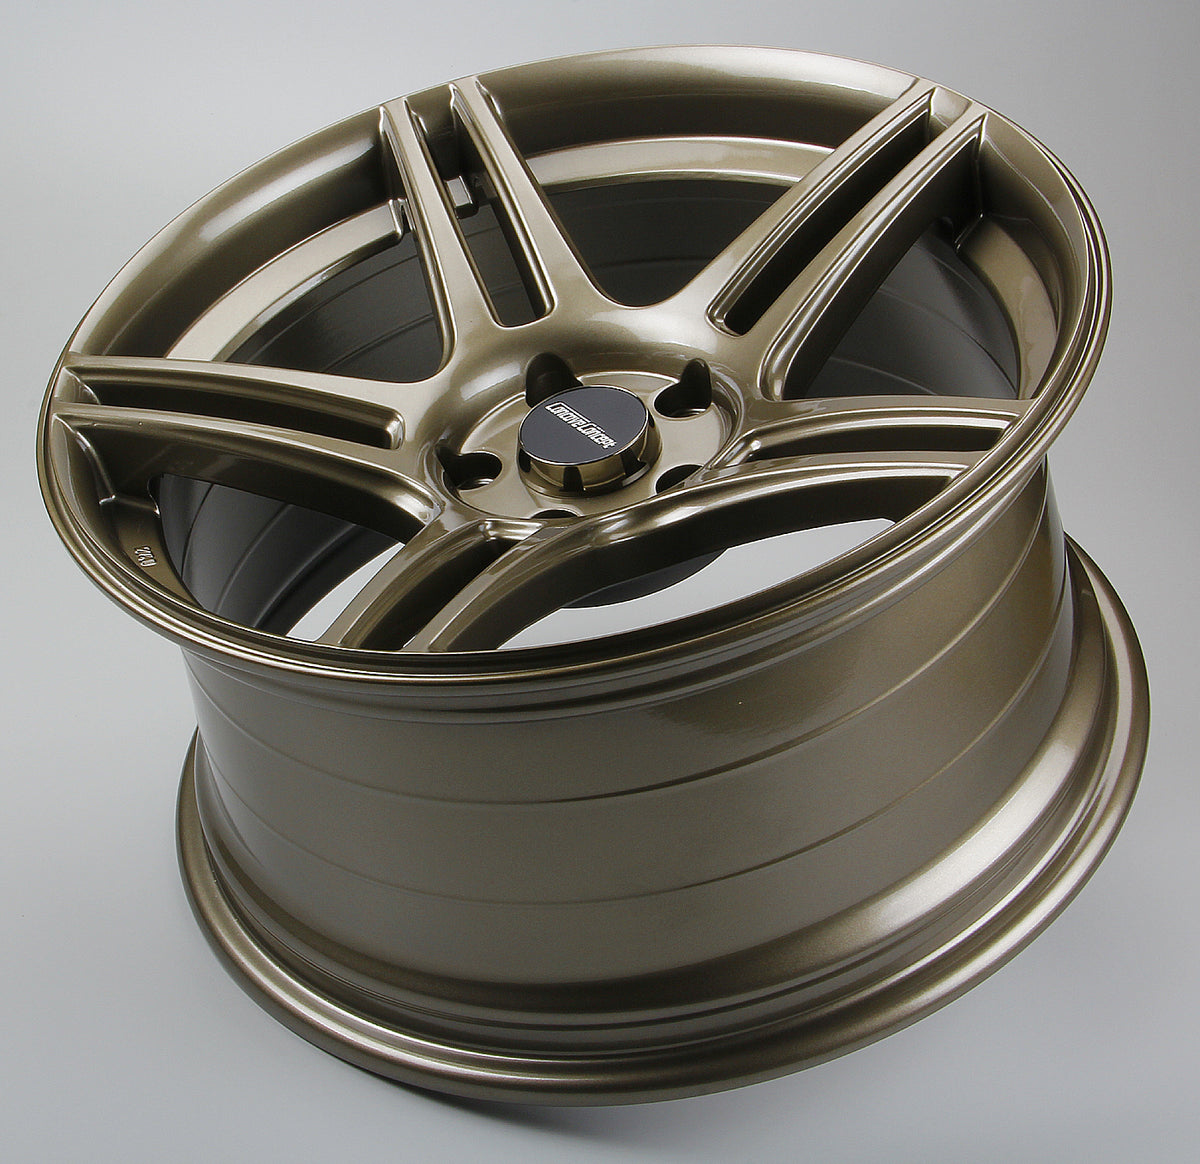 CONCAVE CONCEPT WHEEL CC03 - 18 - On The Run Motorsports